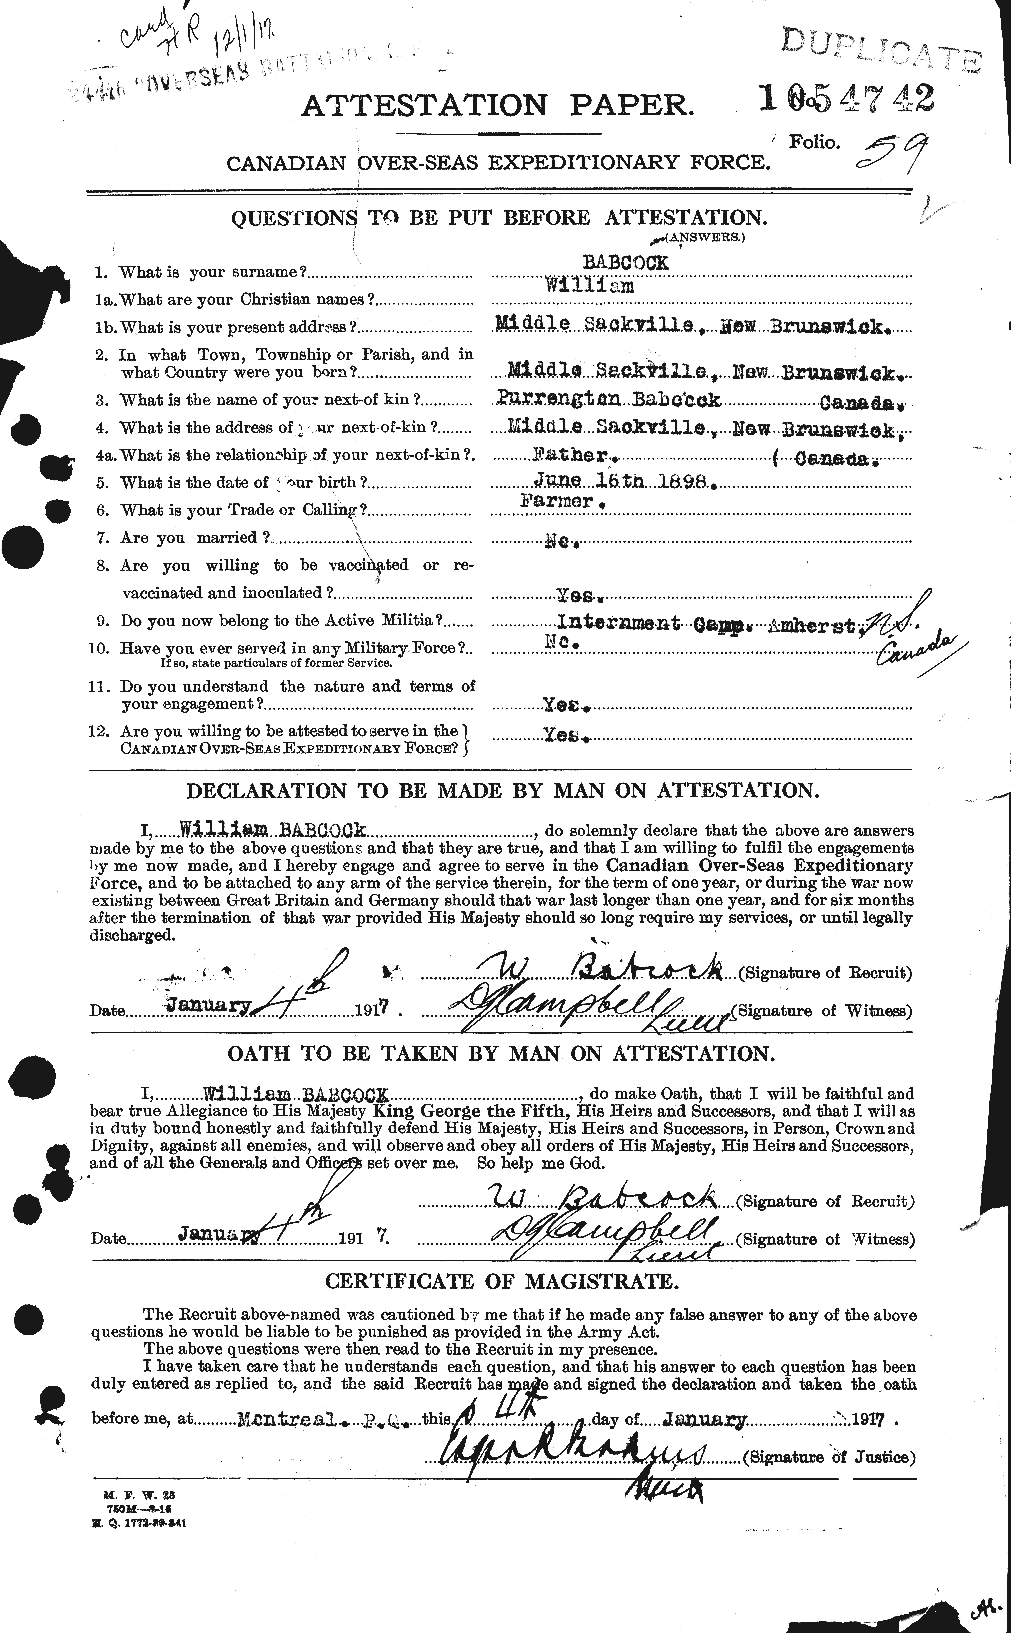 Personnel Records of the First World War - CEF 218194a